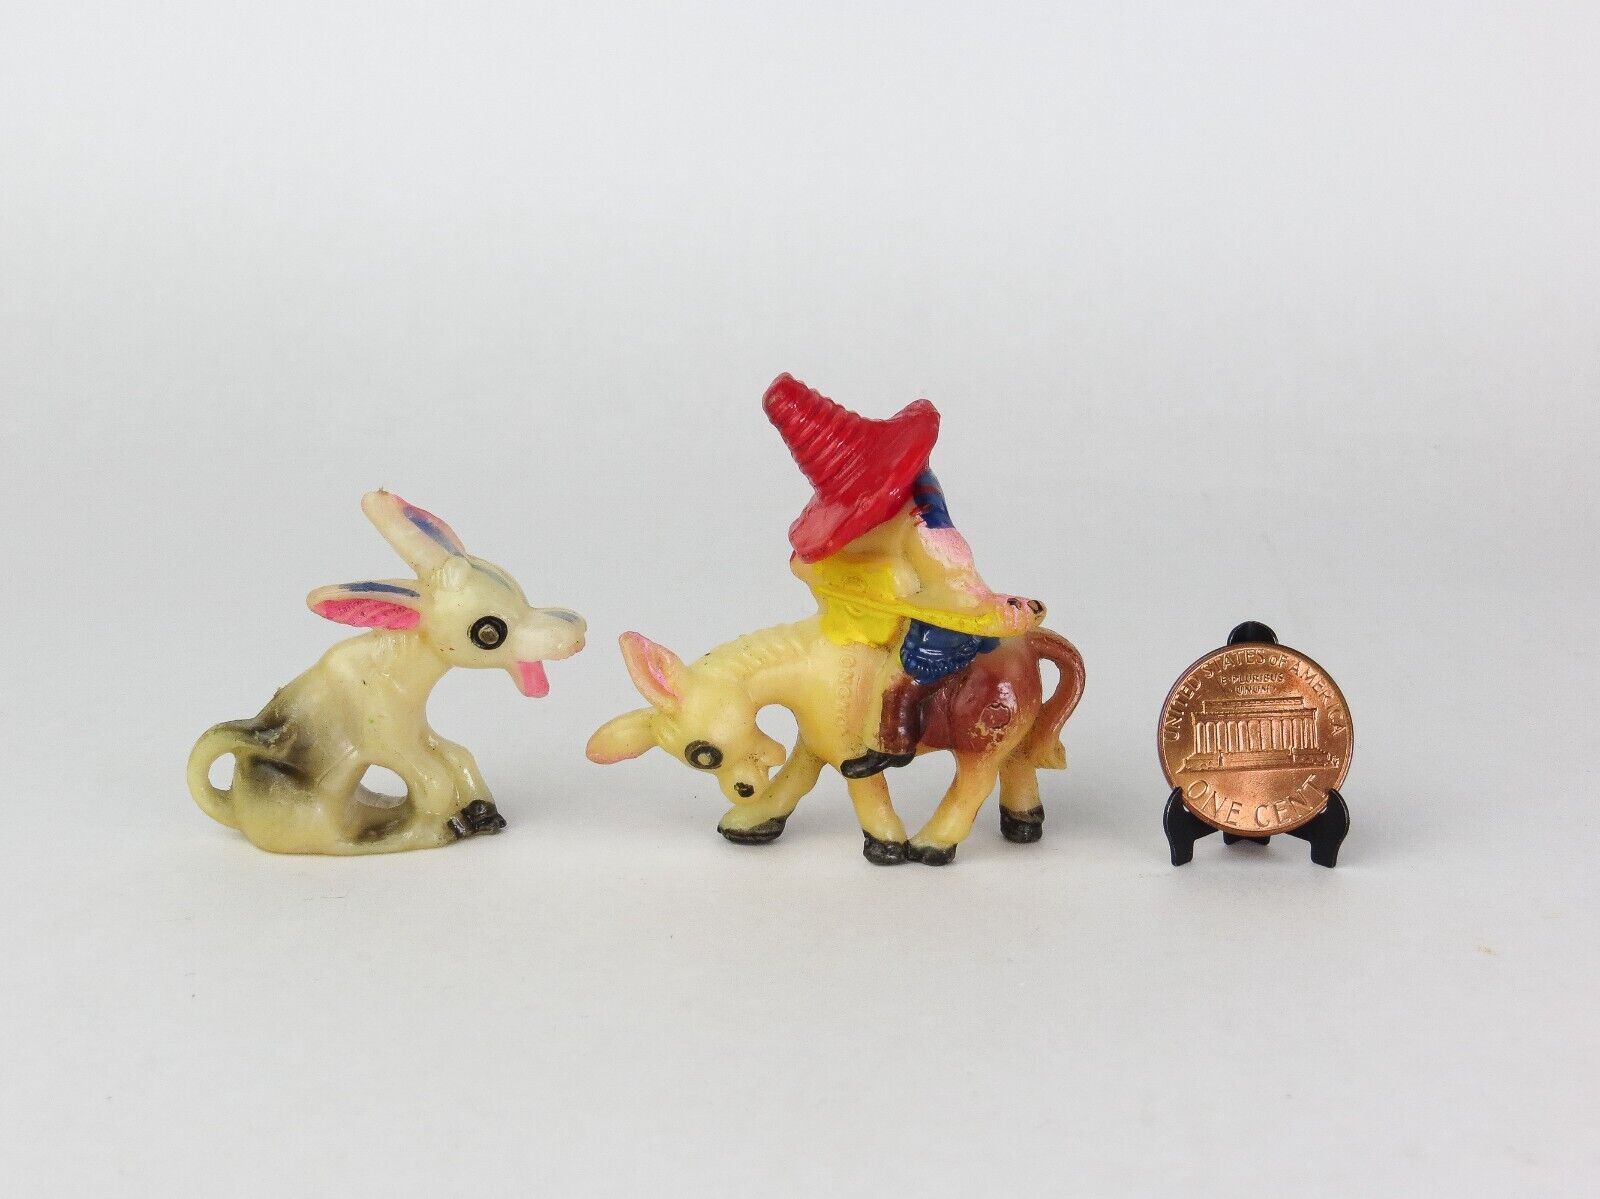 Vintage Miniature Celluloid / Hard Plastic Donkey Figurines, Made in Hong Kong